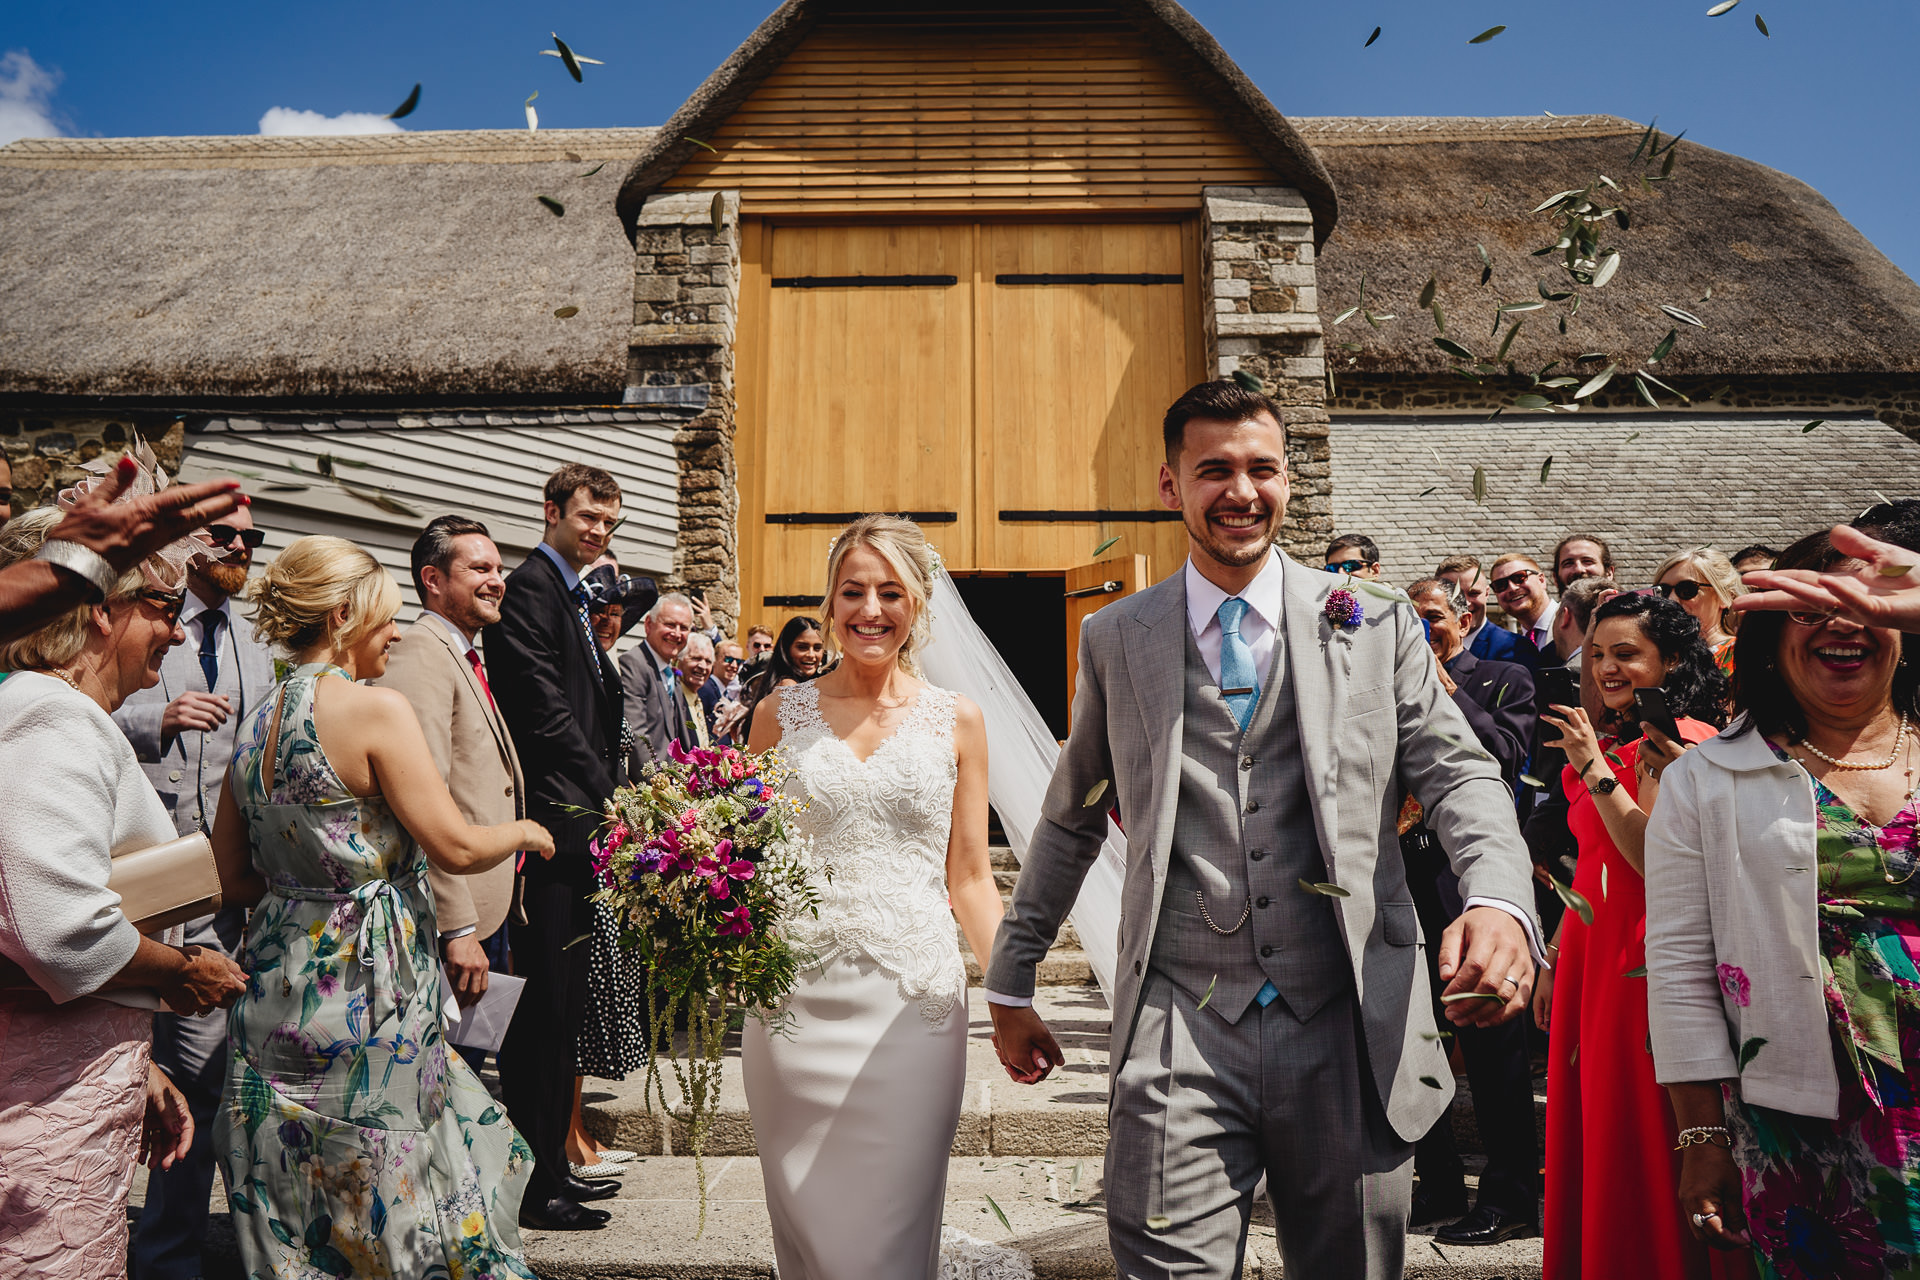 Bride and groom walking through confetti outside the great barn